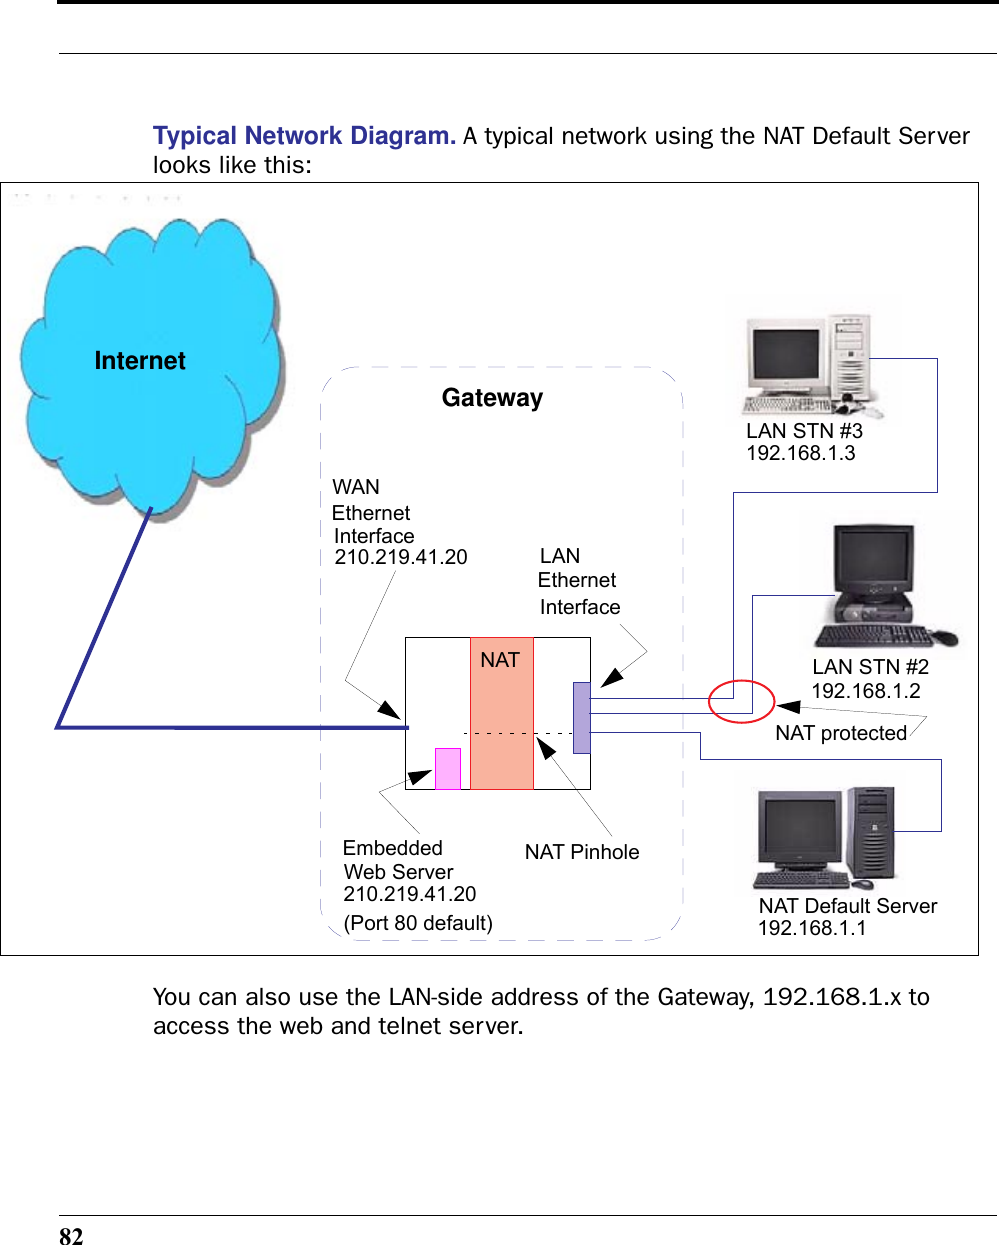 82Typical Network Diagram. A typical network using the NAT Default Server looks like this:You can also use the LAN-side address of the Gateway, 192.168.1.x to access the web and telnet server.WANLANEthernet Interface192.168.1.3192.168.1.2192.168.1.1LAN STN #3LAN STN #2NAT Default ServerGatewayNATNAT PinholeEmbeddedWeb Server210.219.41.20210.219.41.20(Port 80 default)NAT protectedEthernet InterfaceInternet